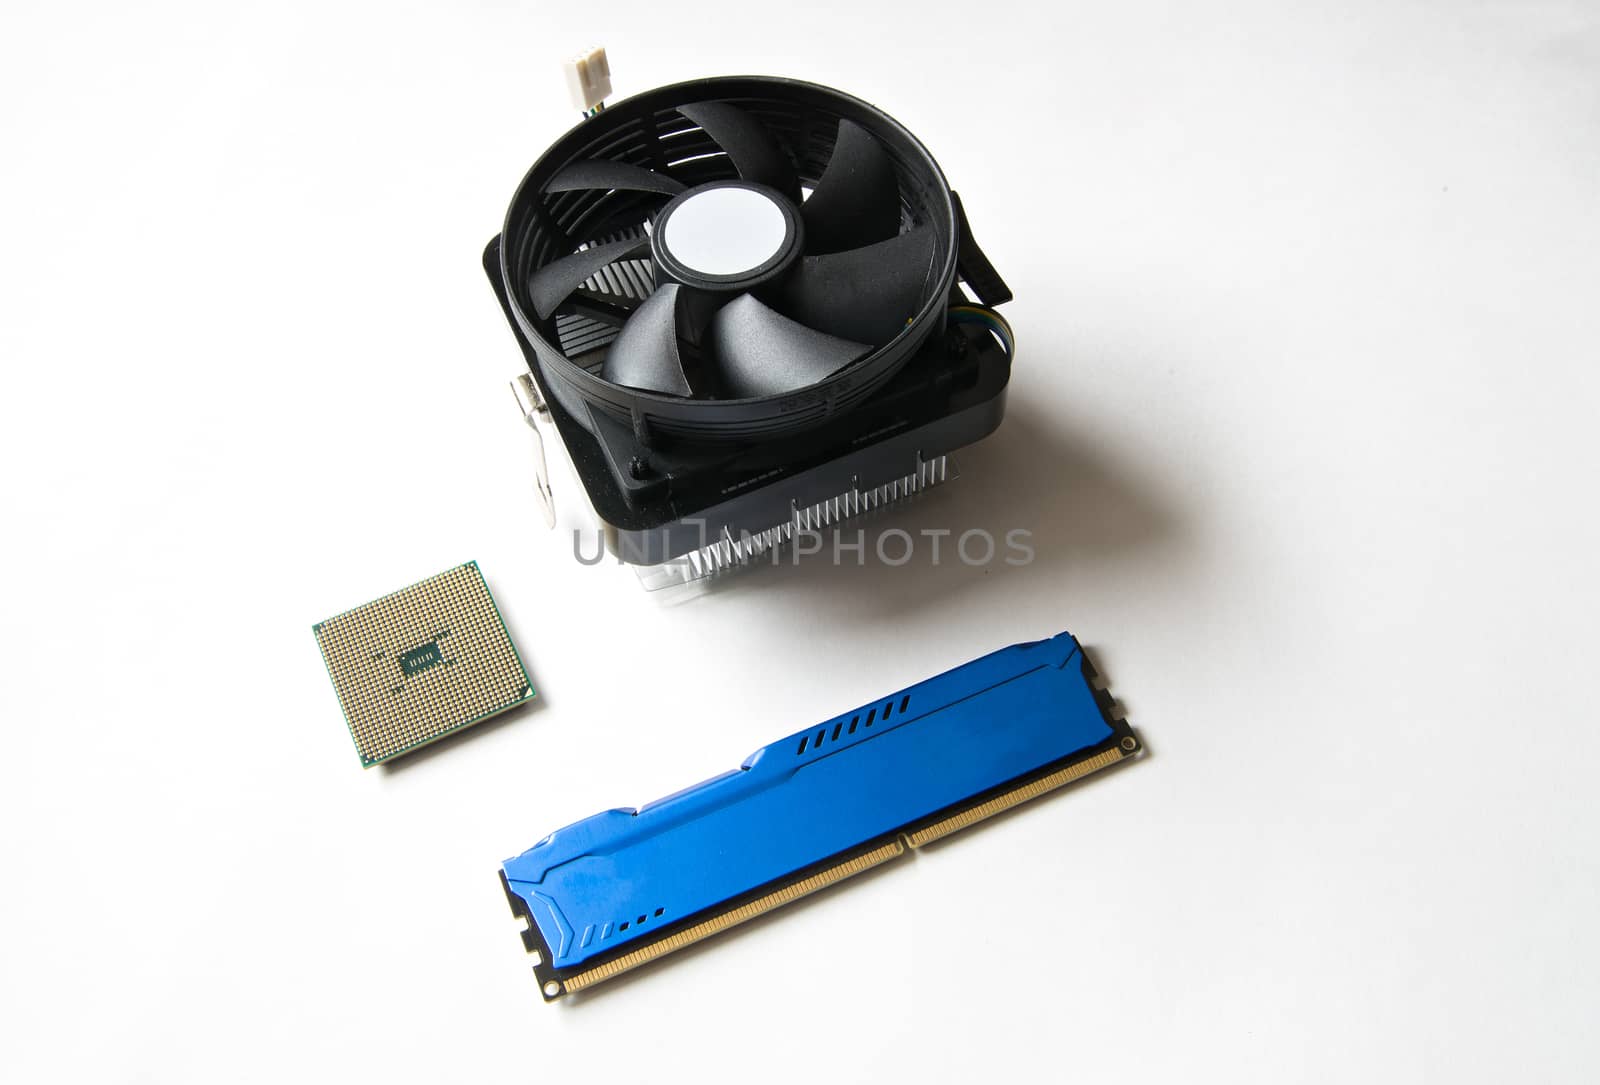 Computer components on a white background. CPU, DDR RAM, Cooler